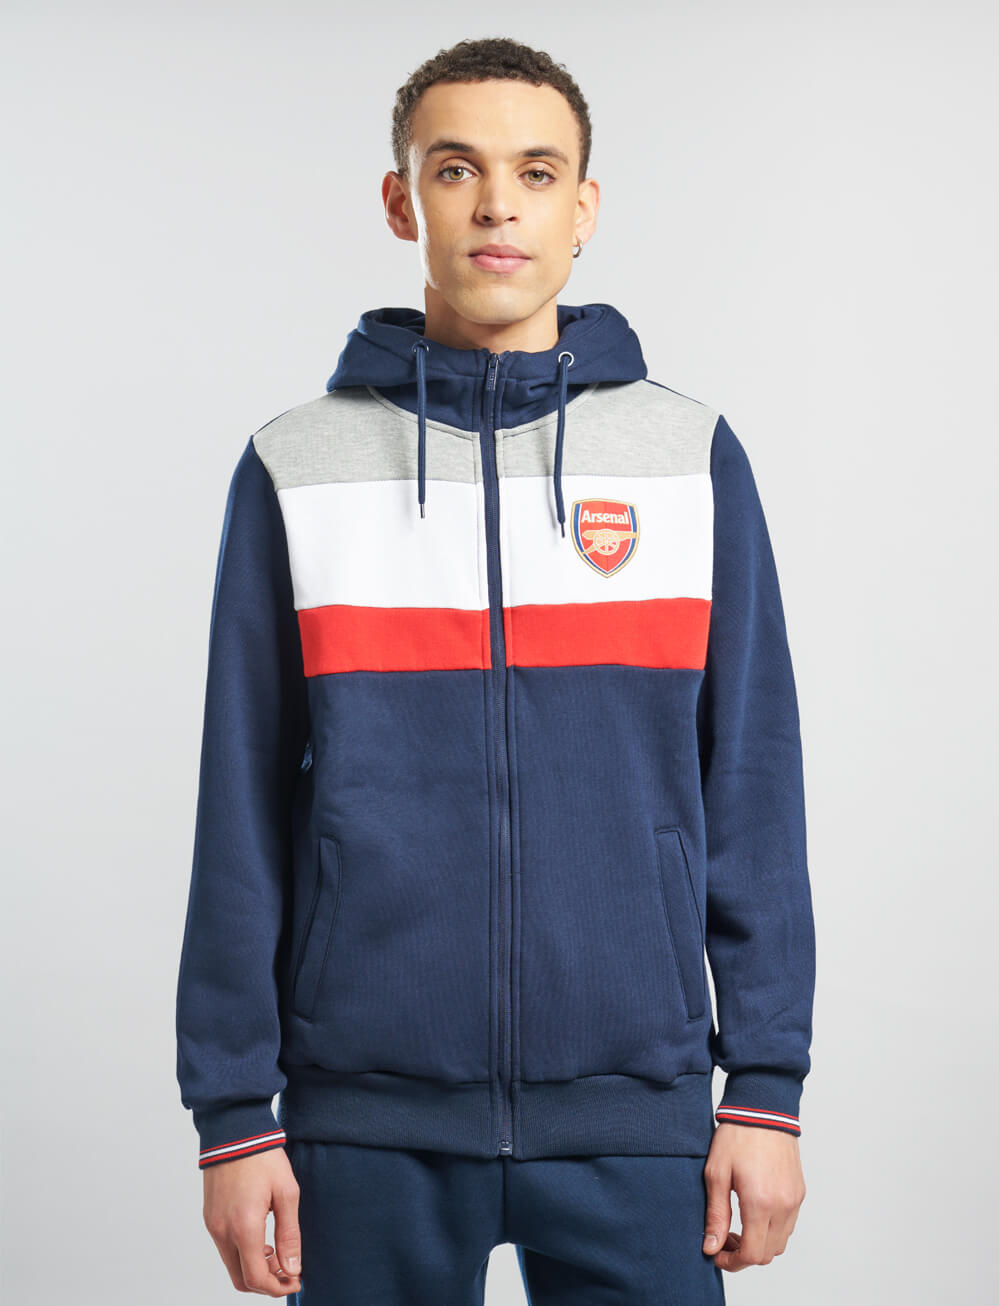 Official Arsenal Full Zip Hoodie - Navy | The World Football Store